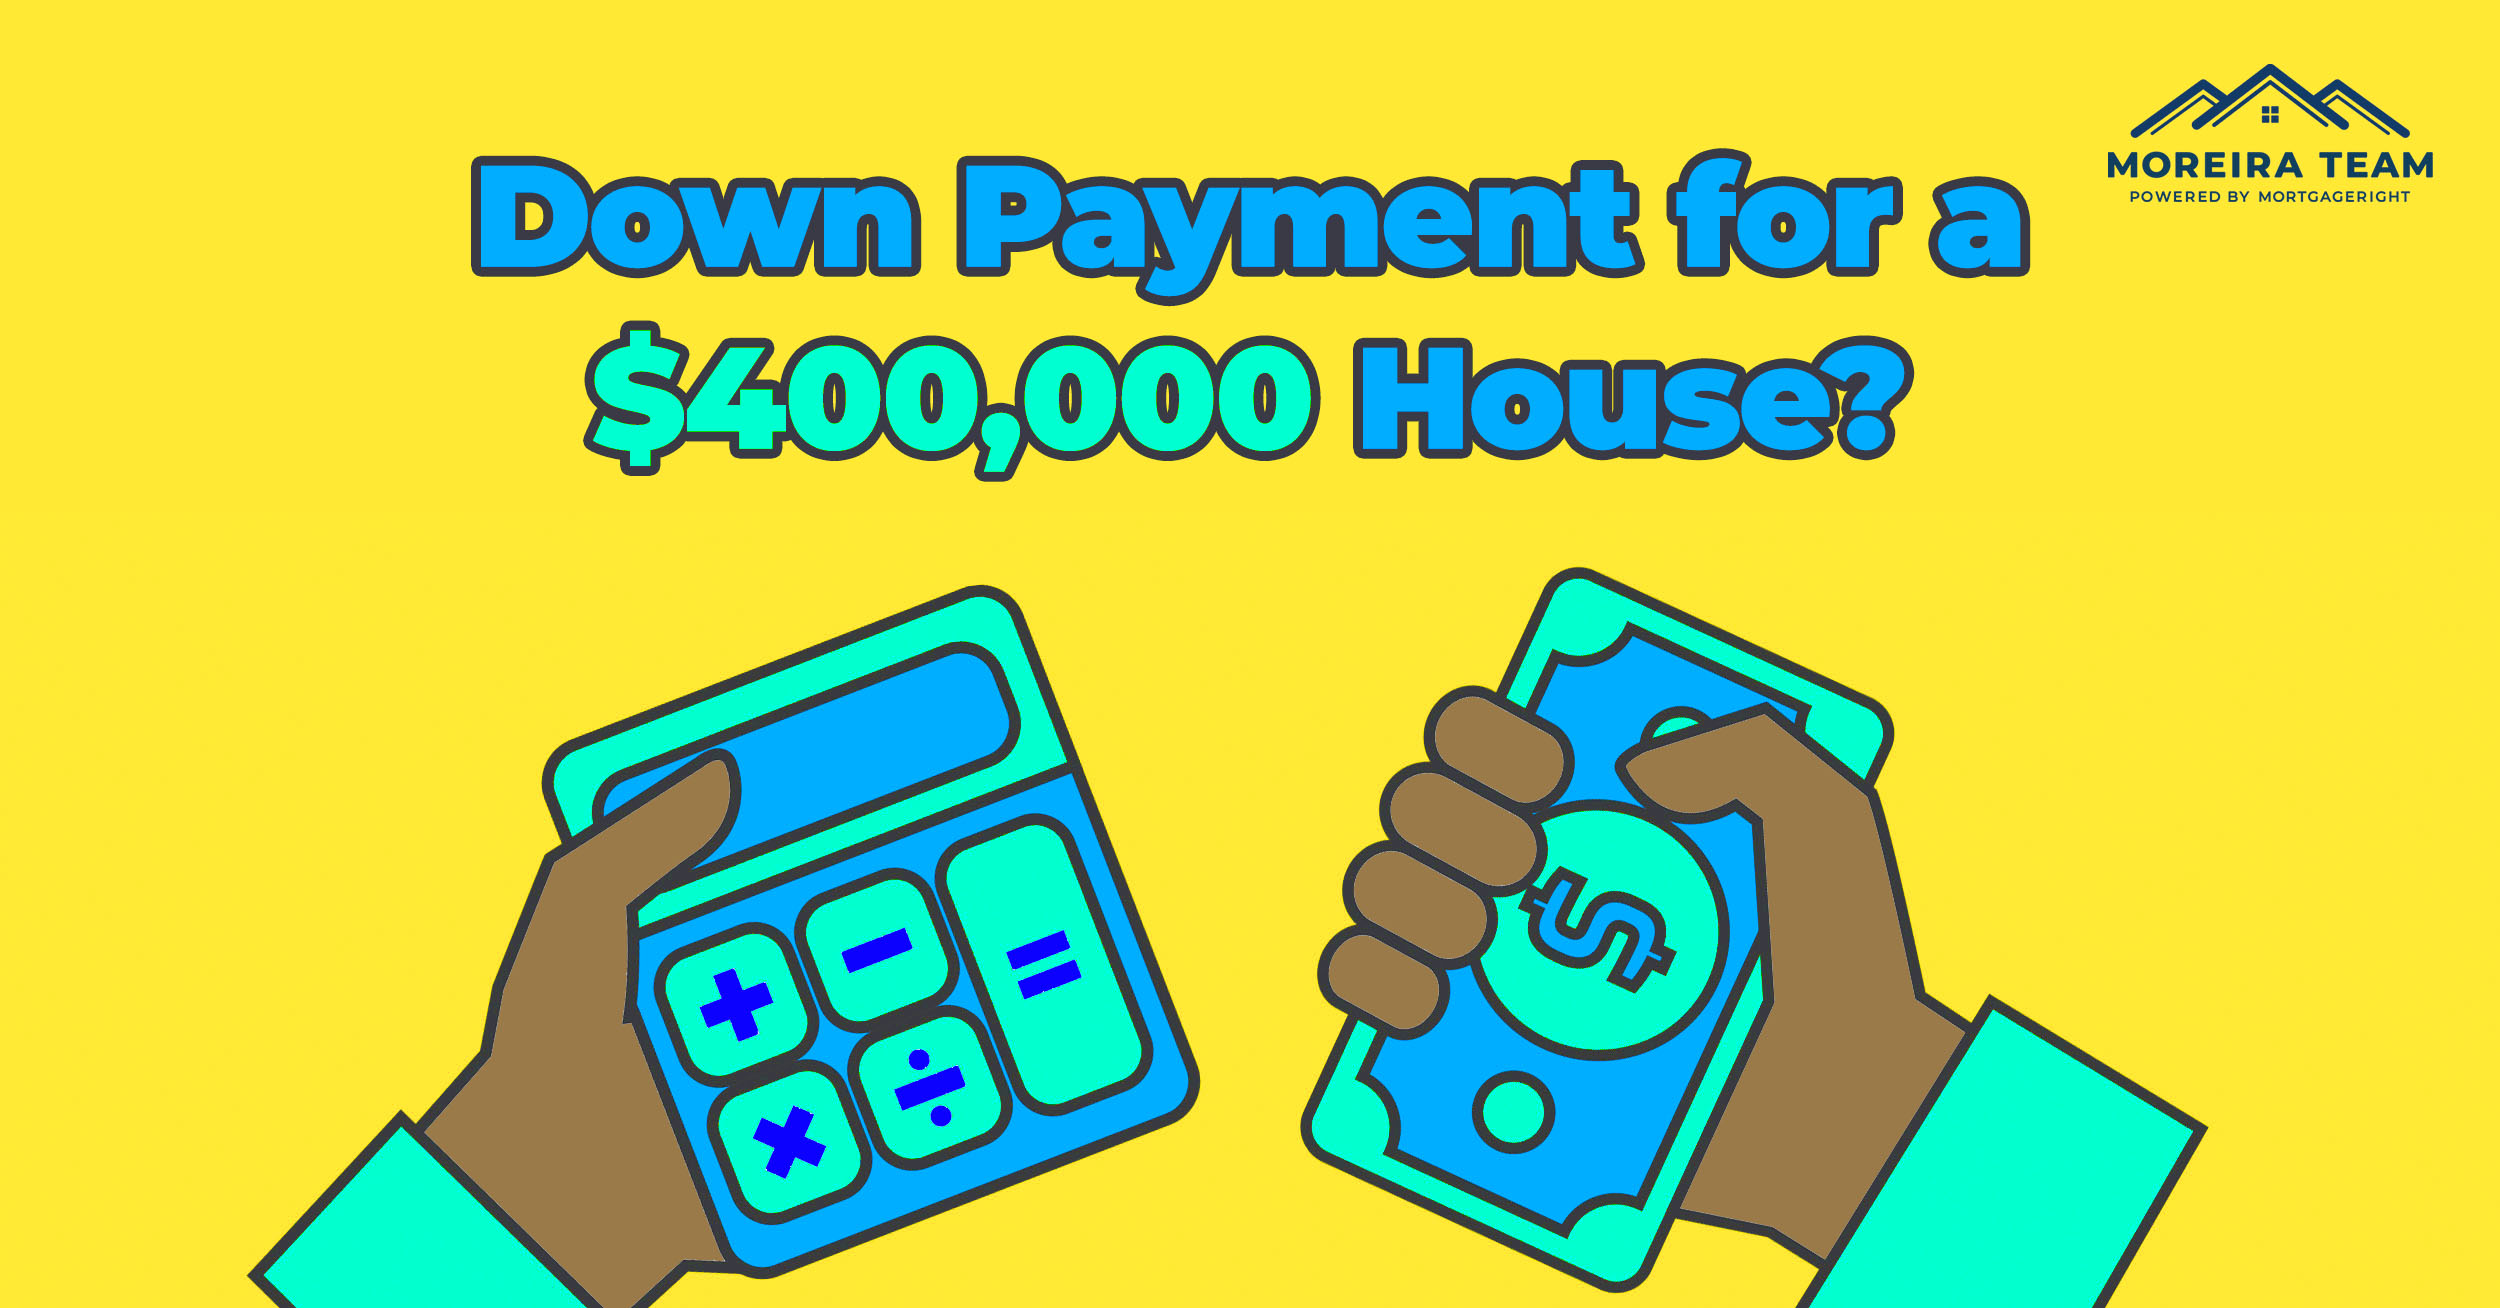 Down Payment Amount for a $400,000 Home?